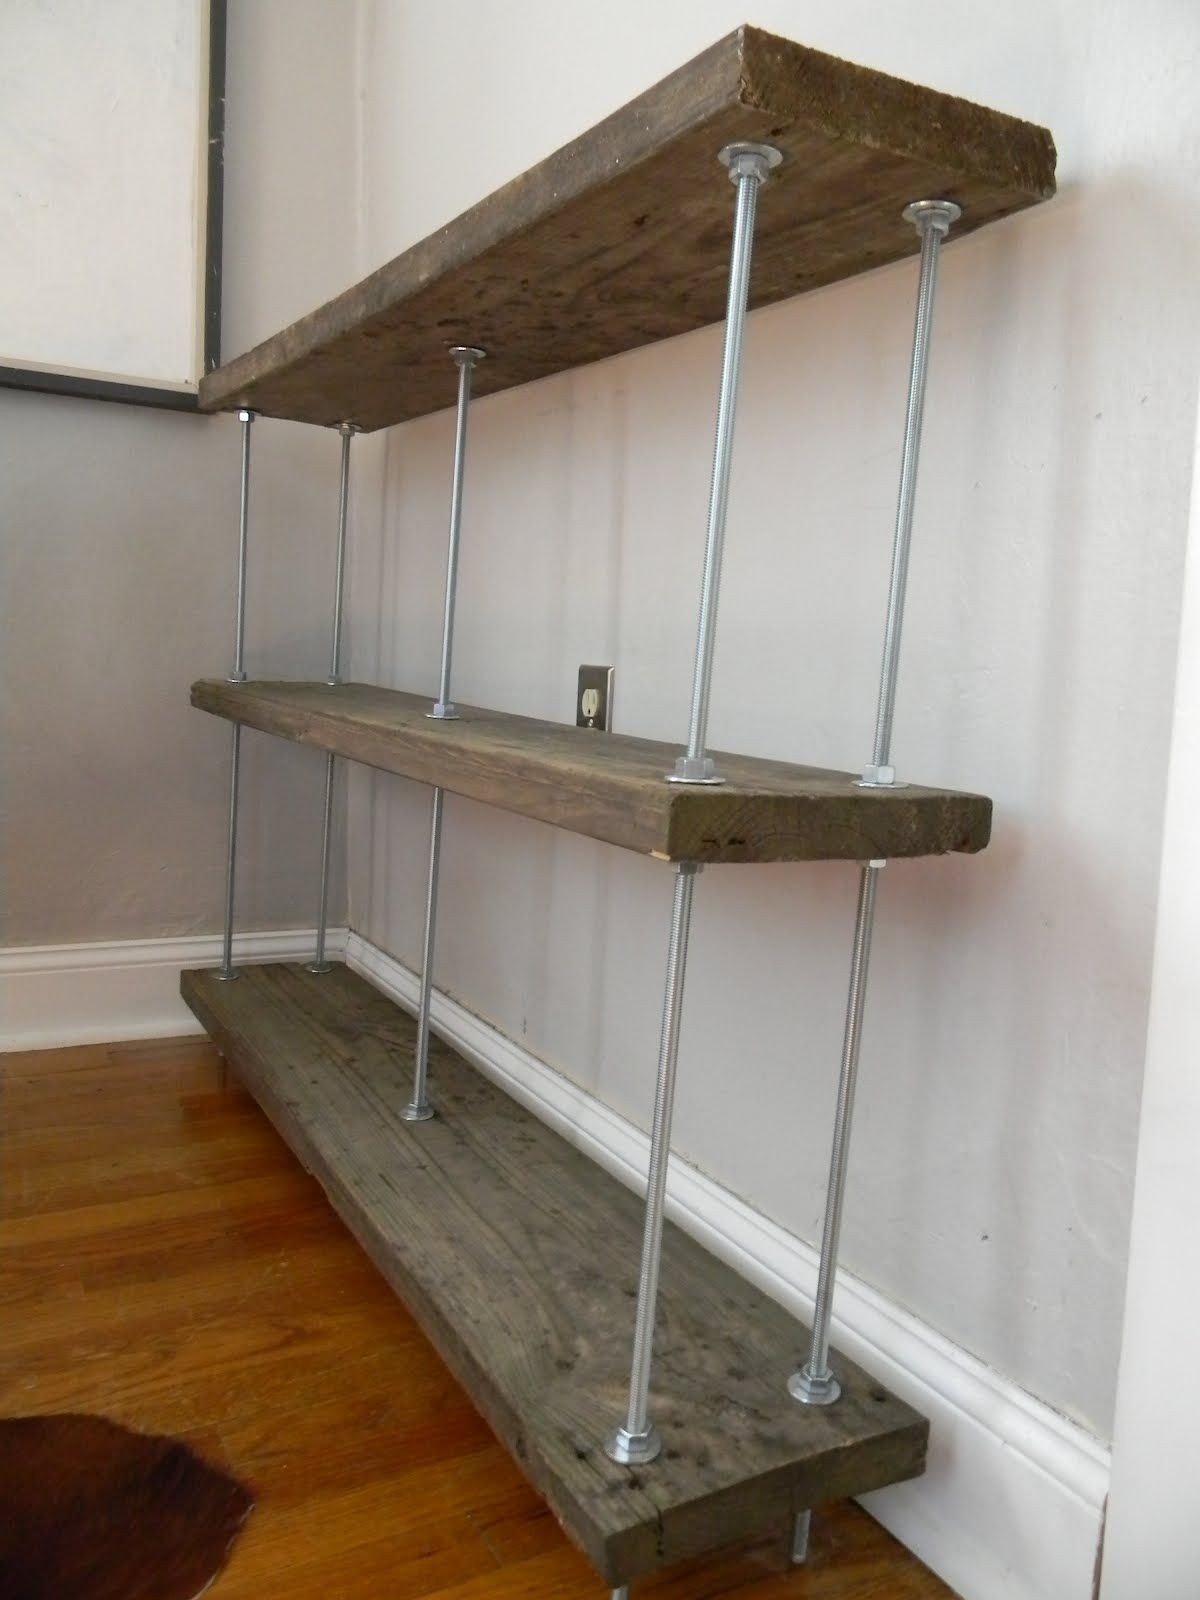 Bookshelf with reclaimed wood and threaded rods